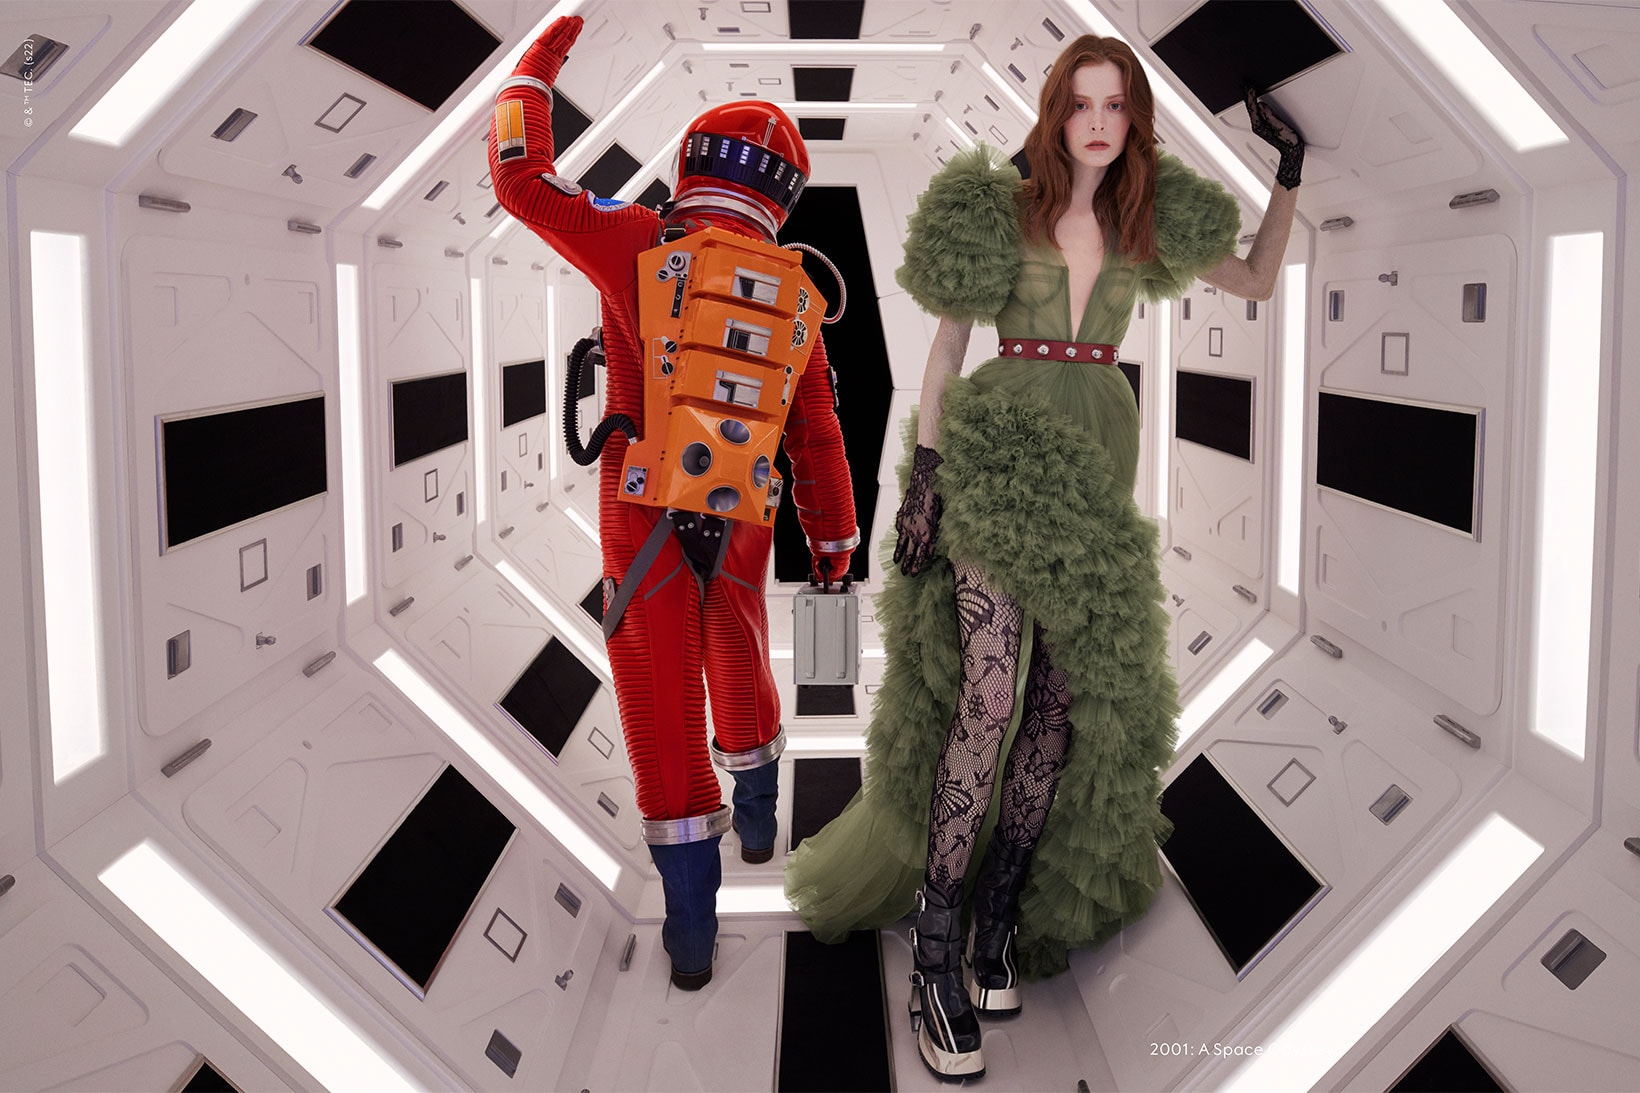 Gucci Exquisit Stanley Kubrick Campaign 2001 A Space Odyssey Shining Eyes Wide Shut Images 